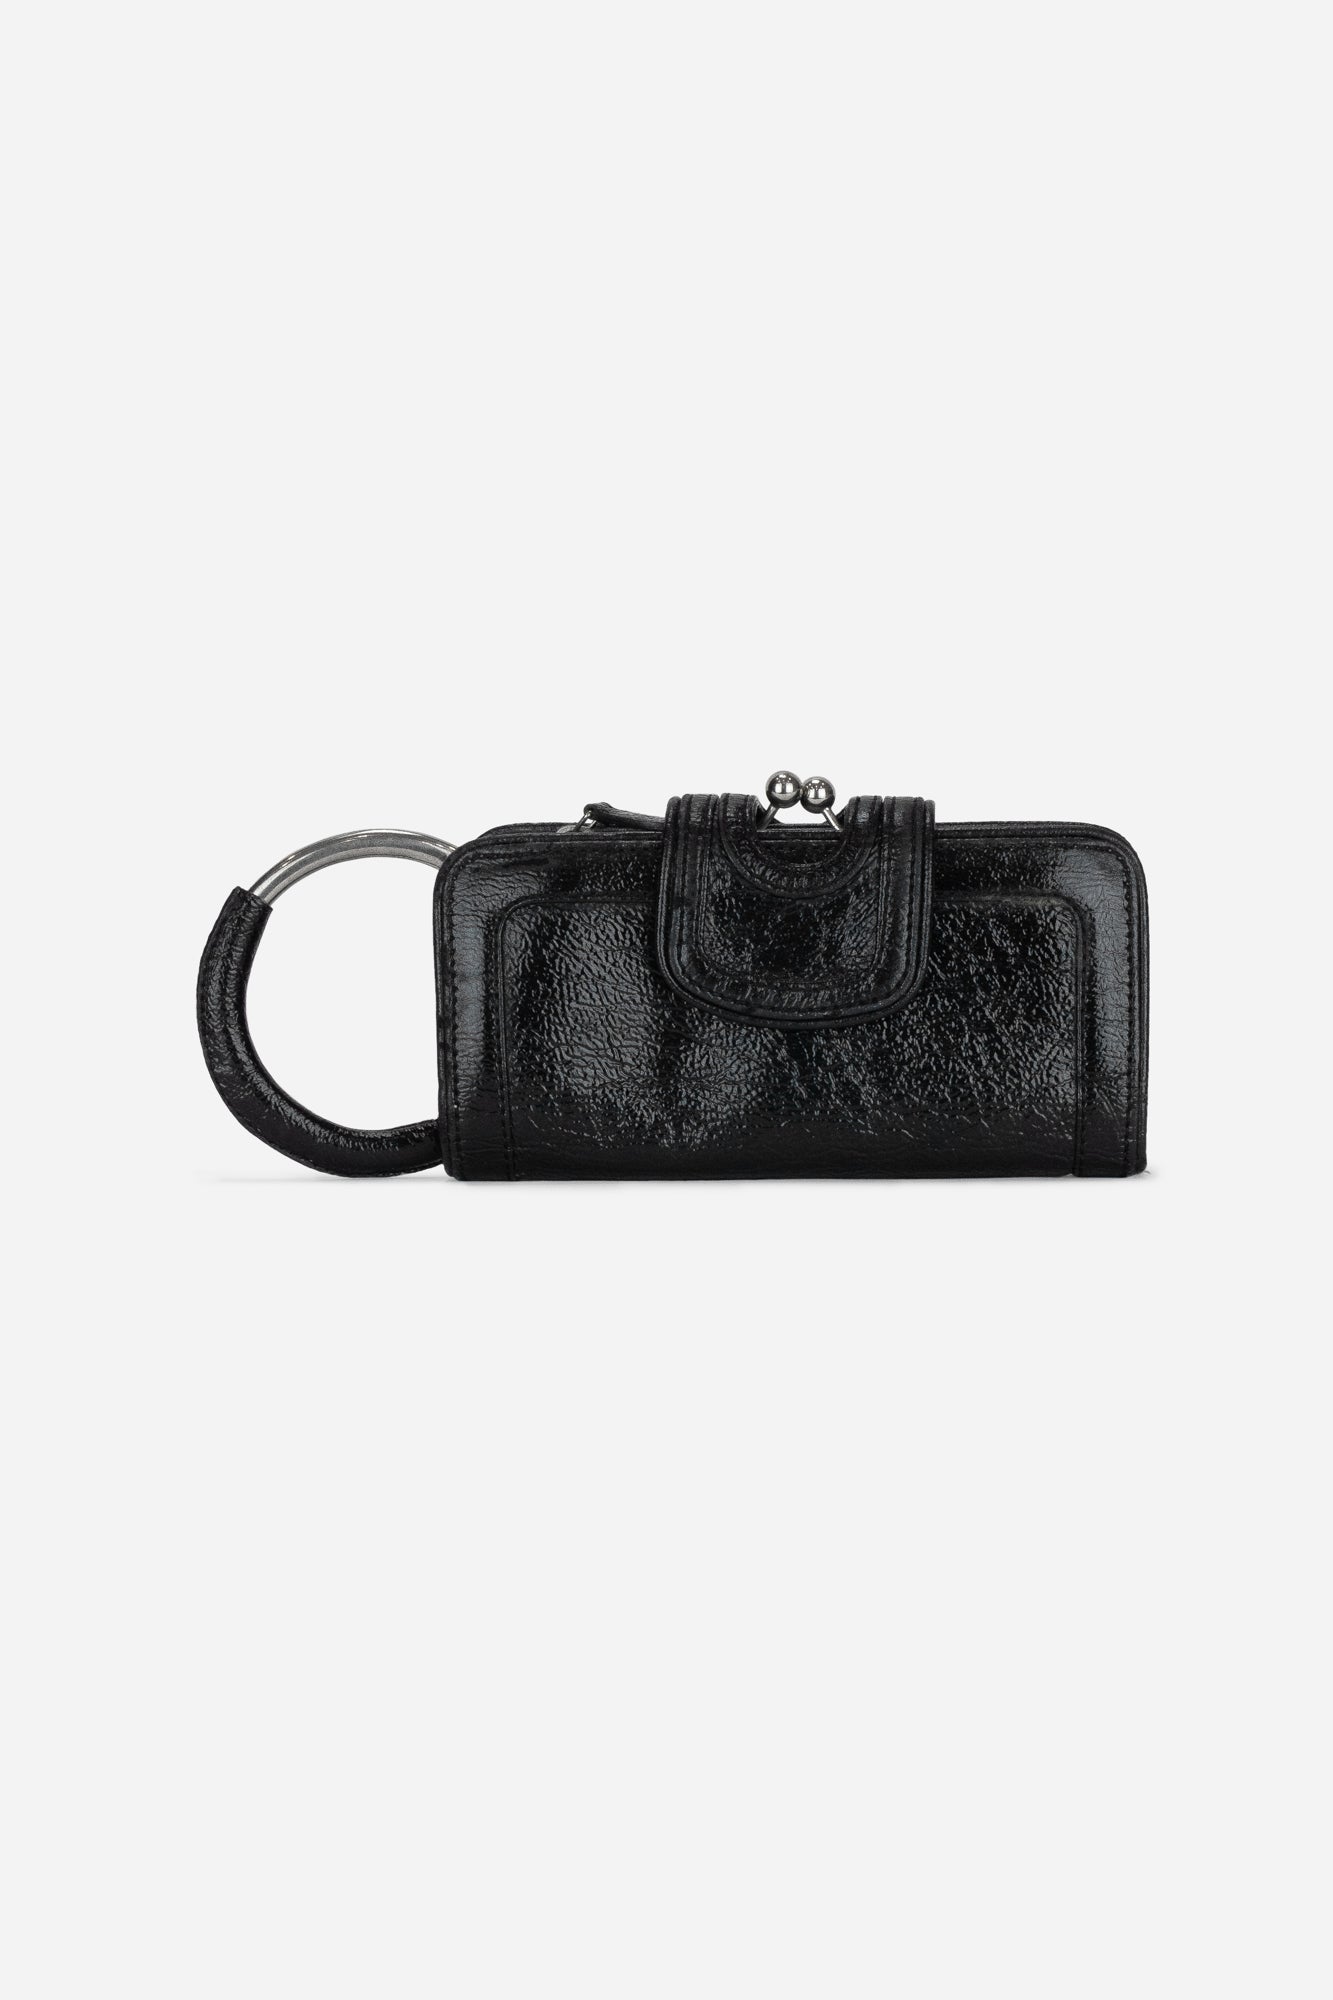 Félicie Strap & Go Monogram - Wallets and Small Leather Goods